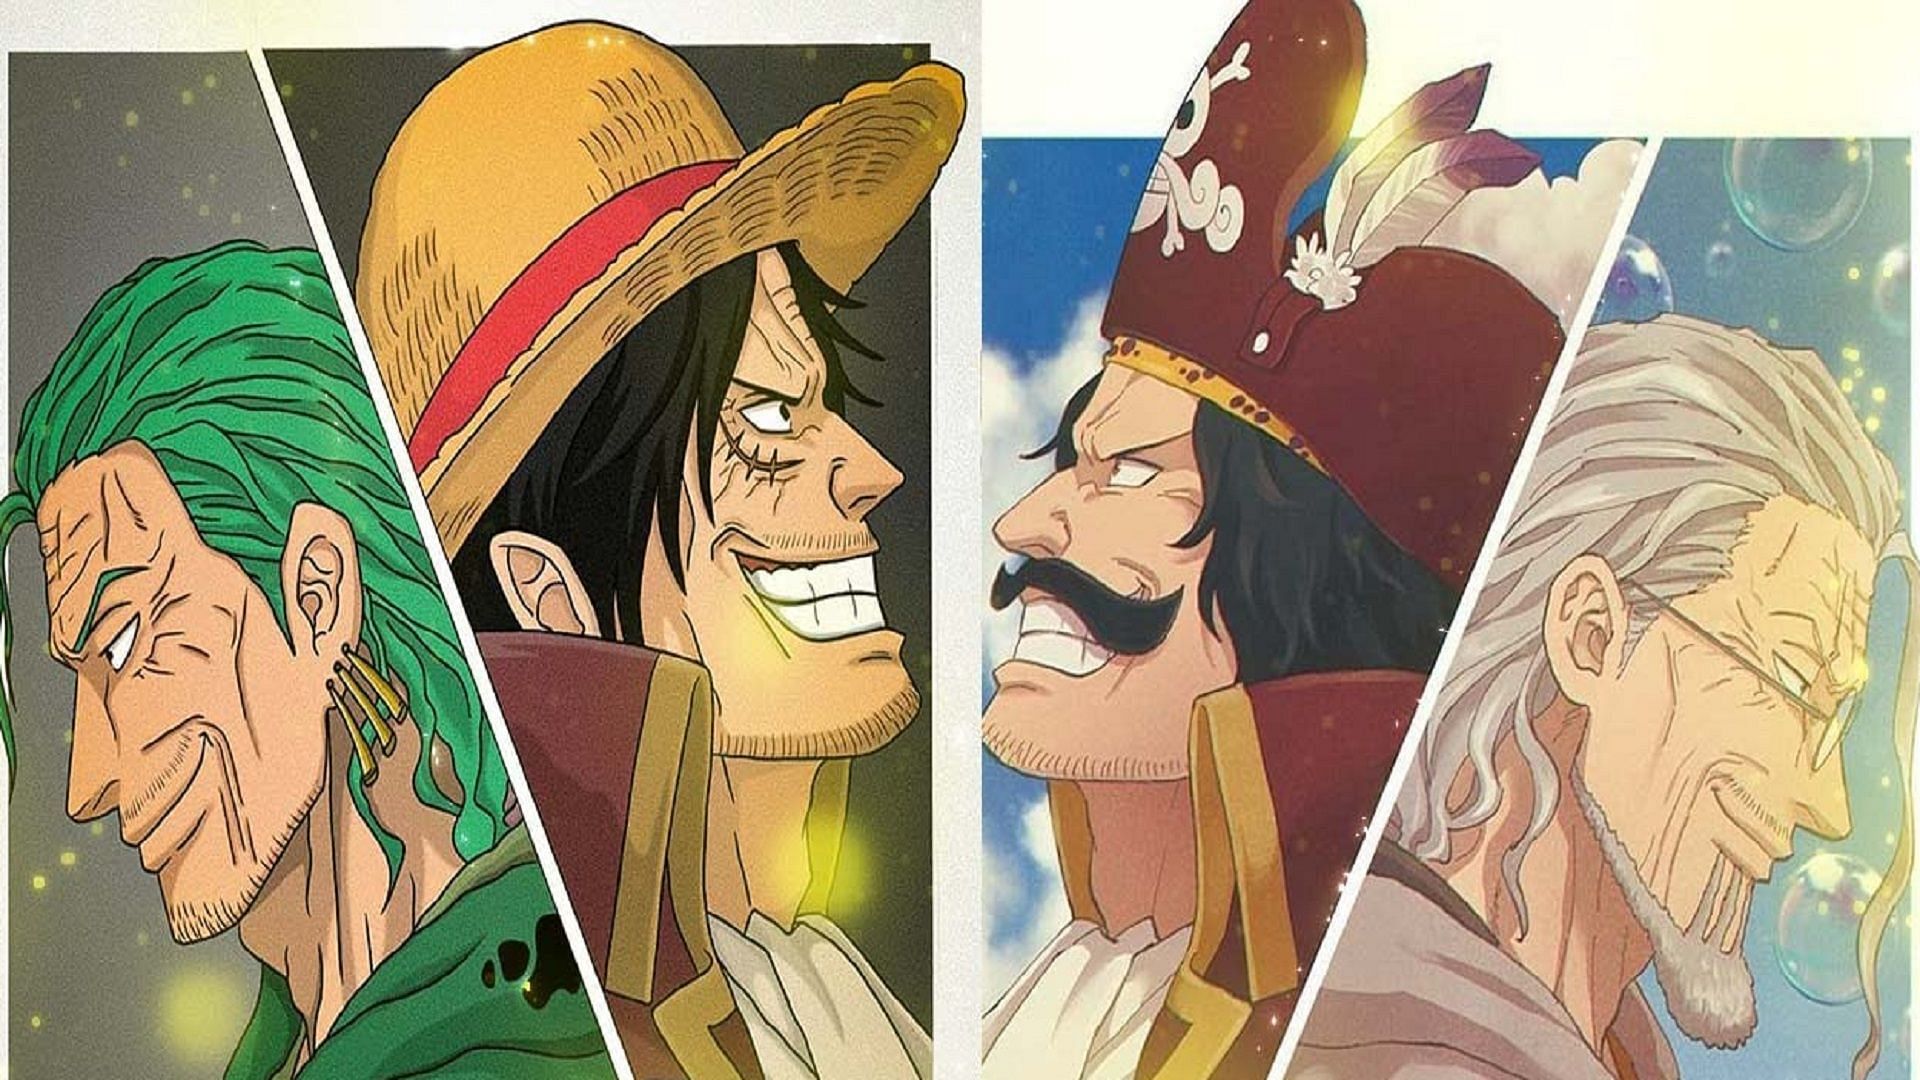 One Piece fans just love the analogy between Luffy, with his right-hand man Zoro, and Roger, with his right-hand man Rayleigh (Image via Eiichiro Oda/Shueisha, One Piece)